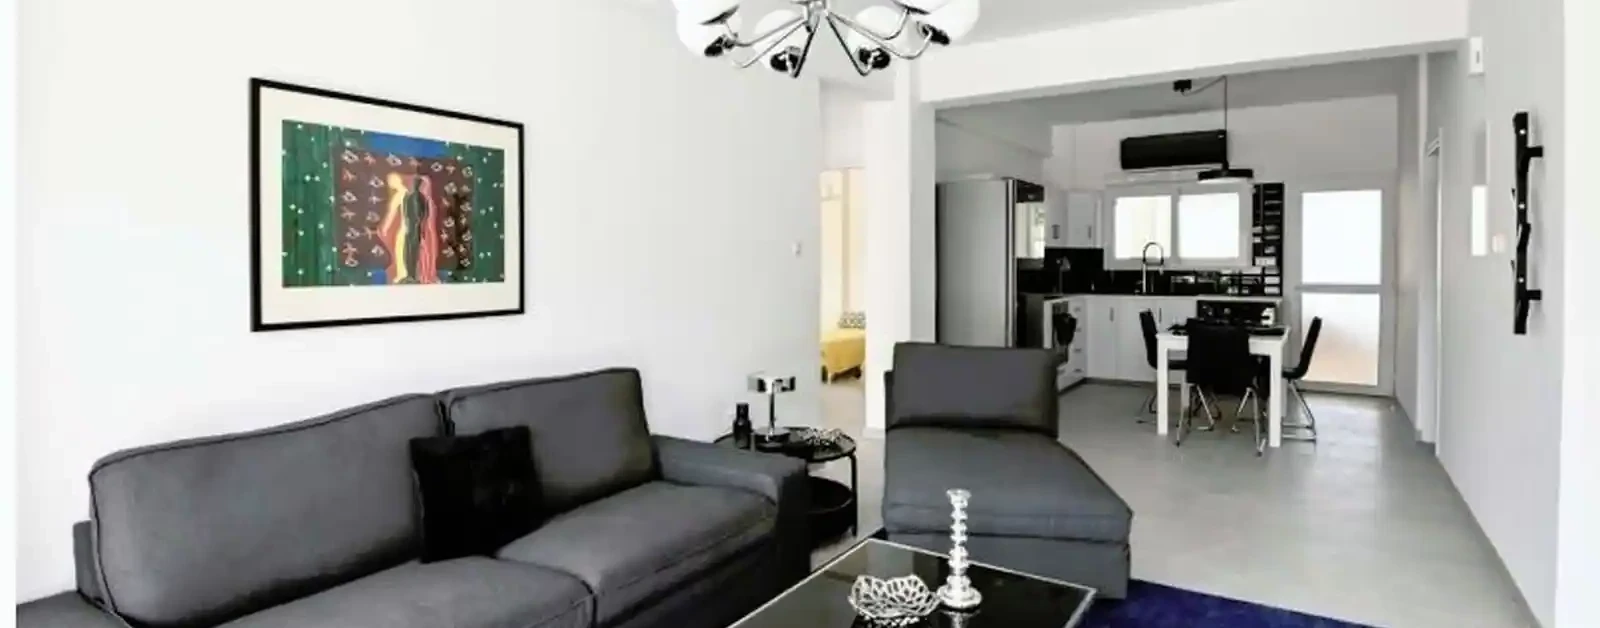 2-bedroom apartment fоr sаle €189.000, image 1